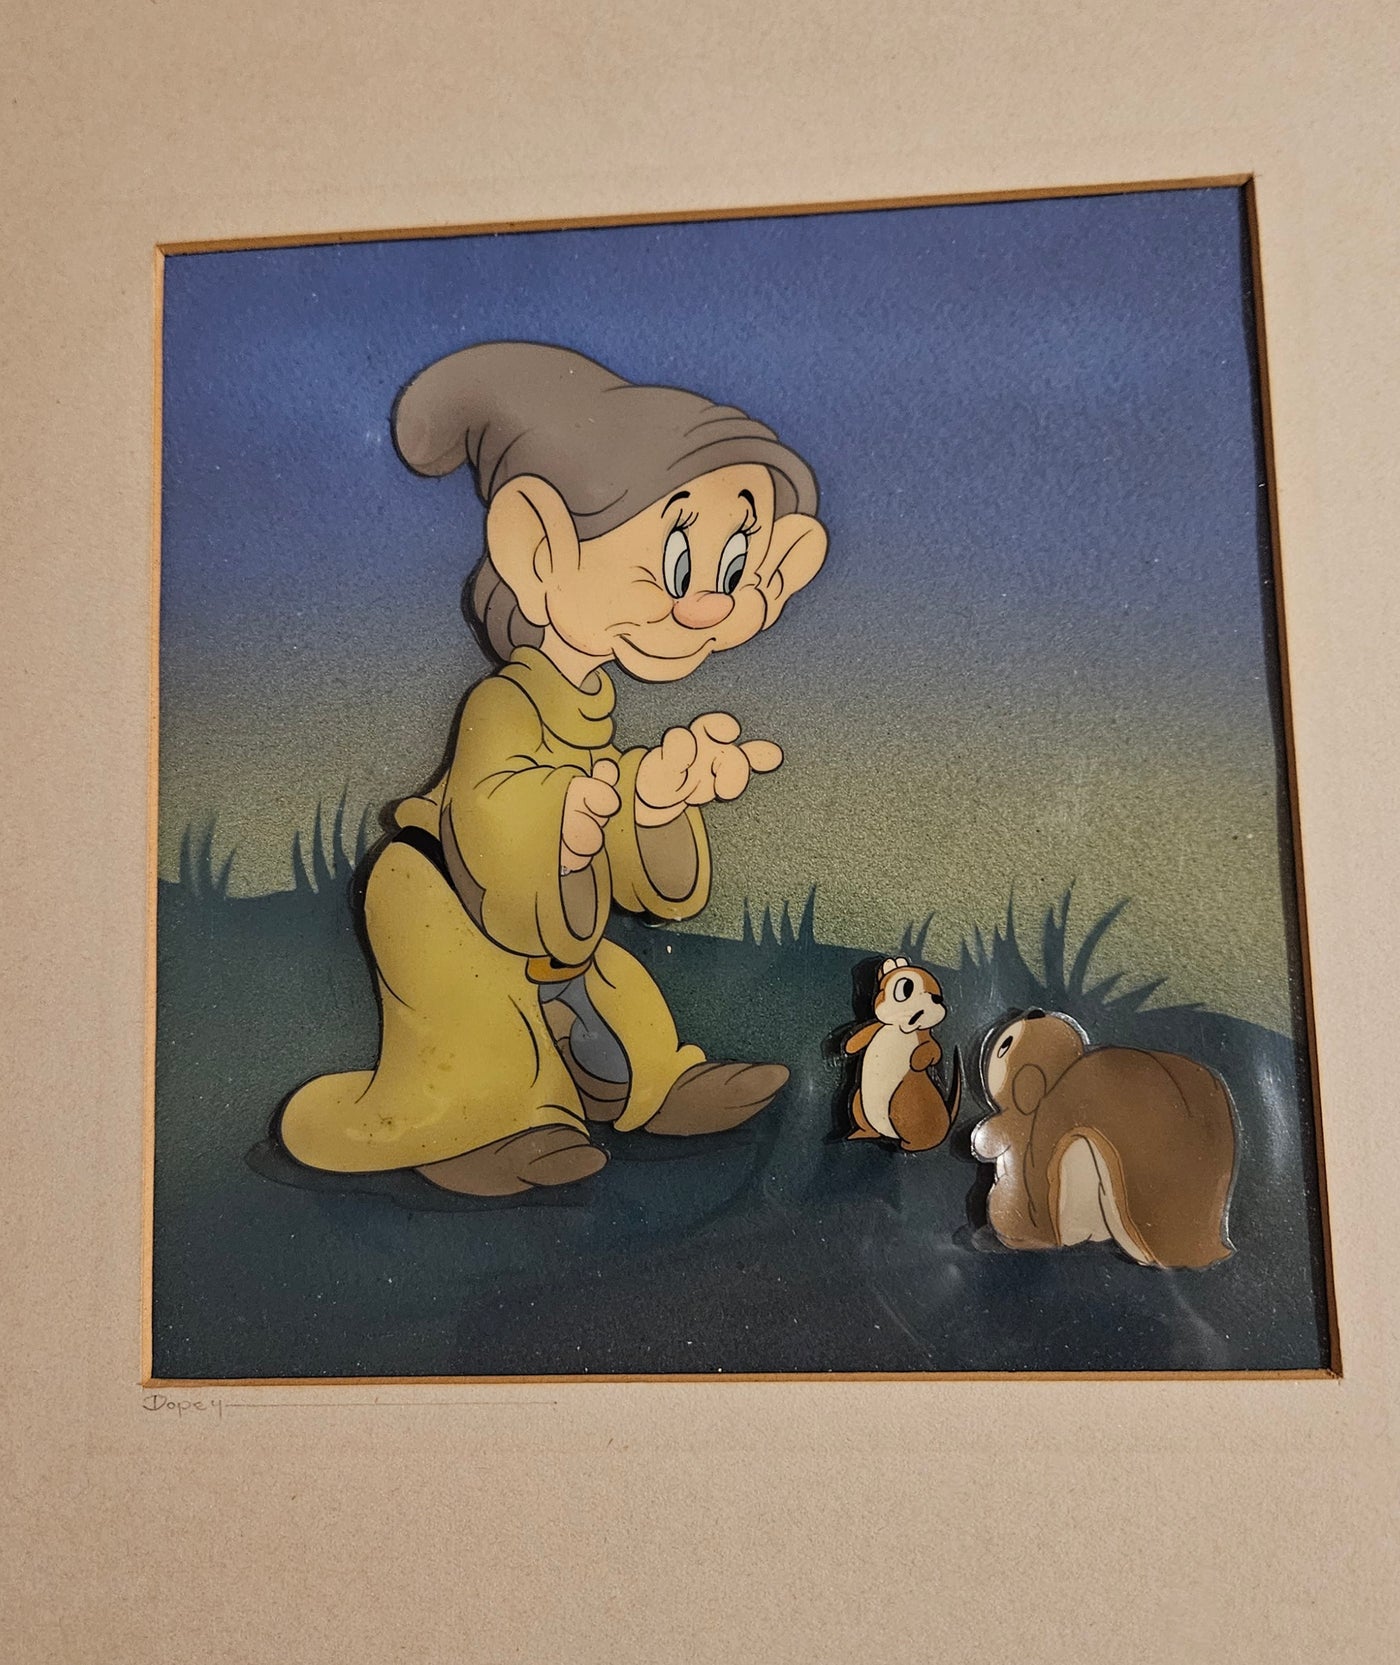 Original Walt Disney Production Cel on Courvoisier Background from Snow White and the Seven Dwarfs, featuring Dopey